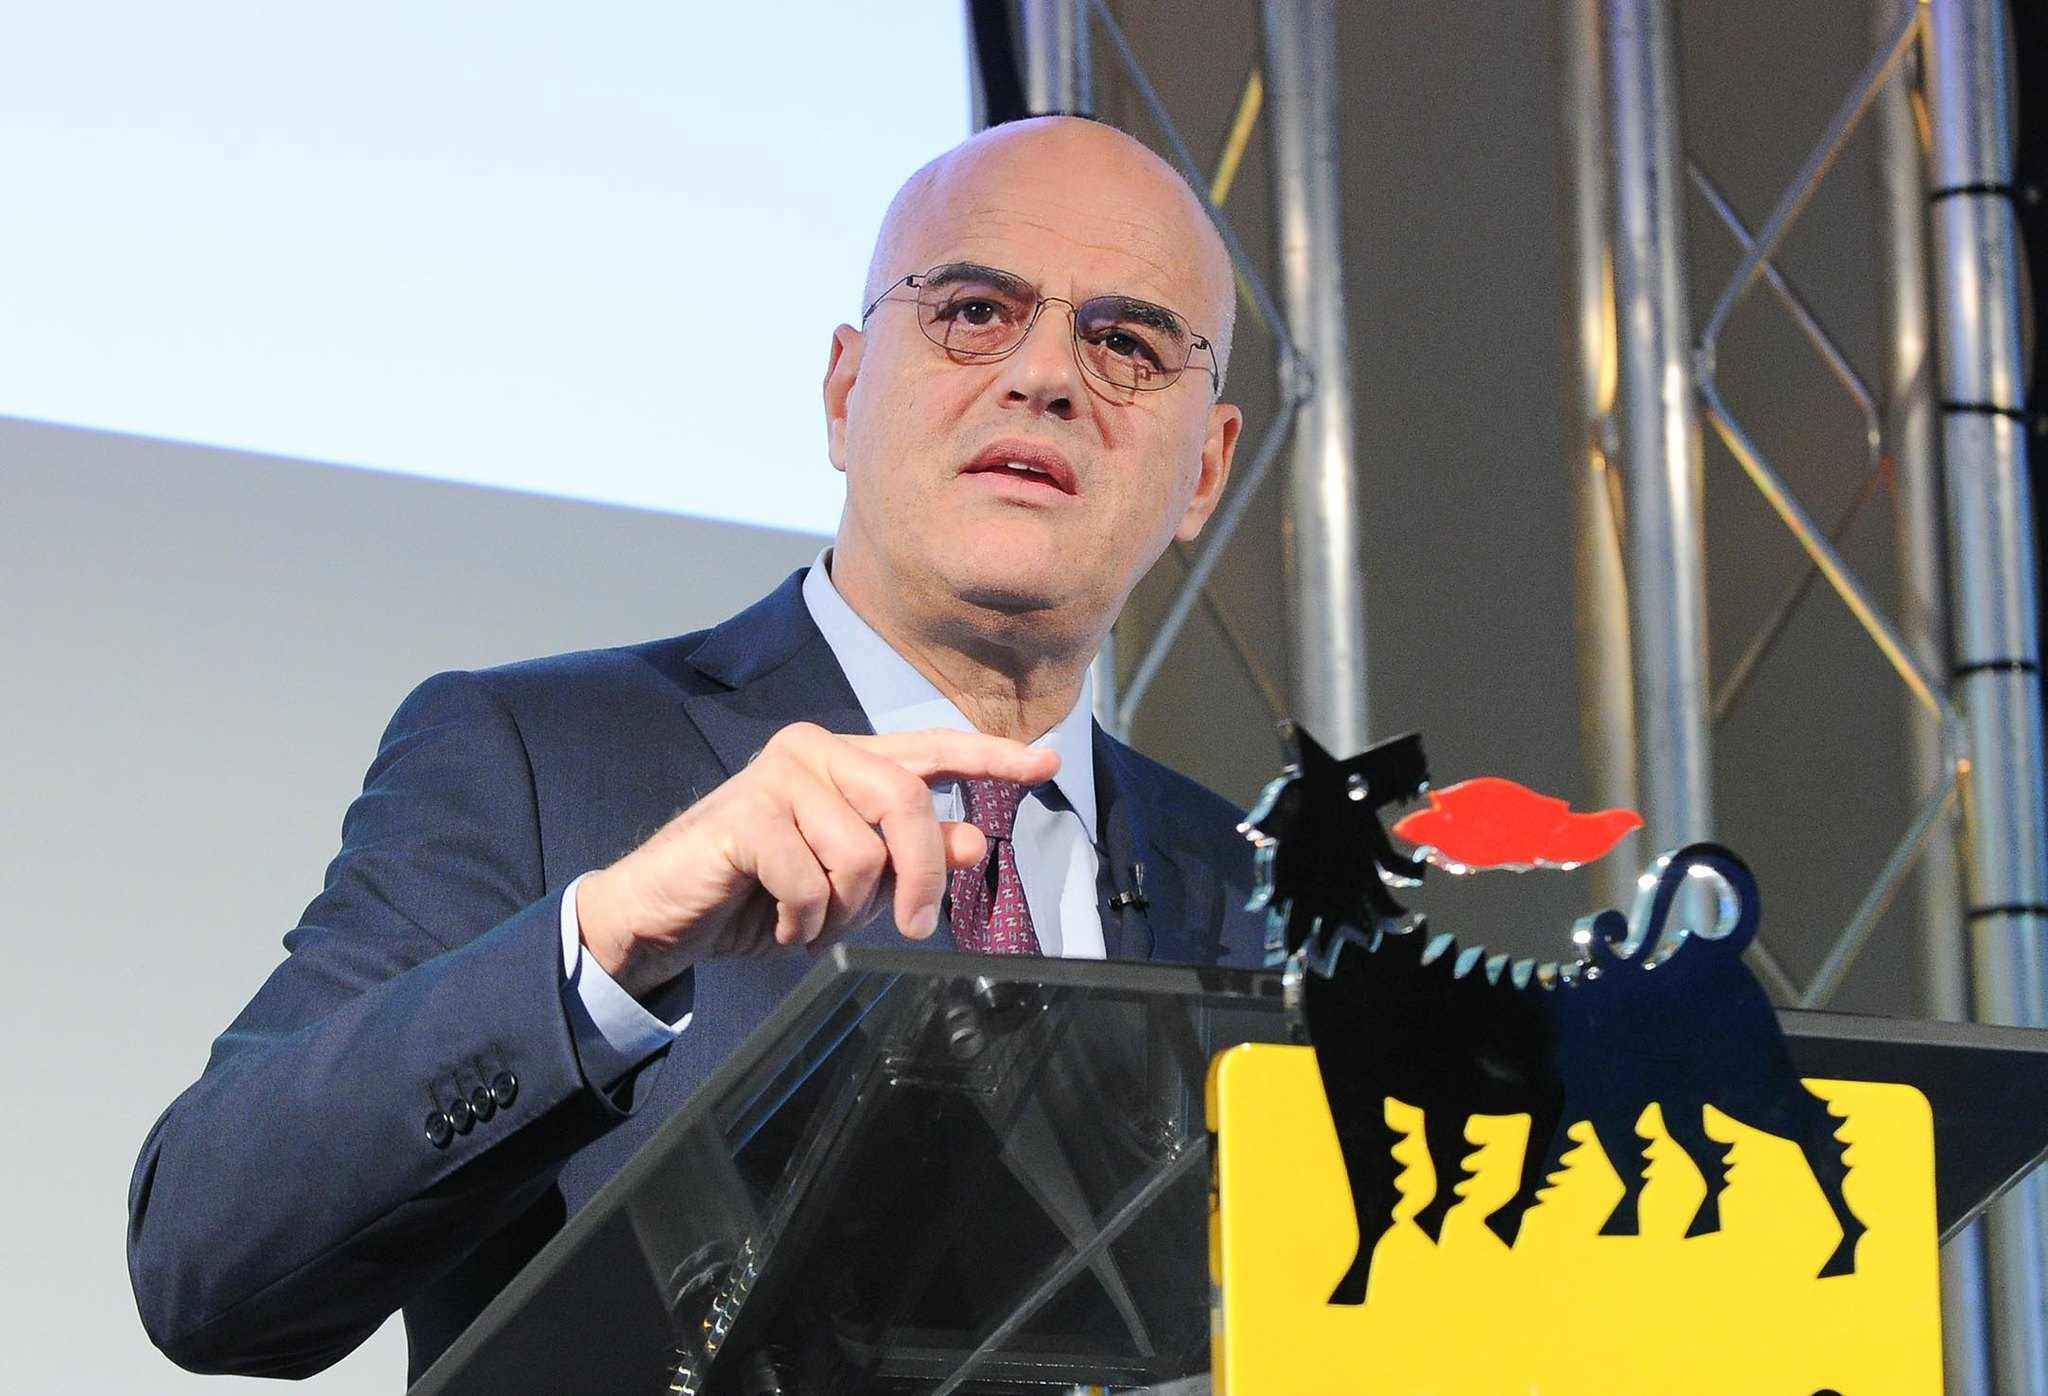 eni-and-saipem-in-push-to-reduce-carbon-footprint-through-new-collaboration-offshore-energy